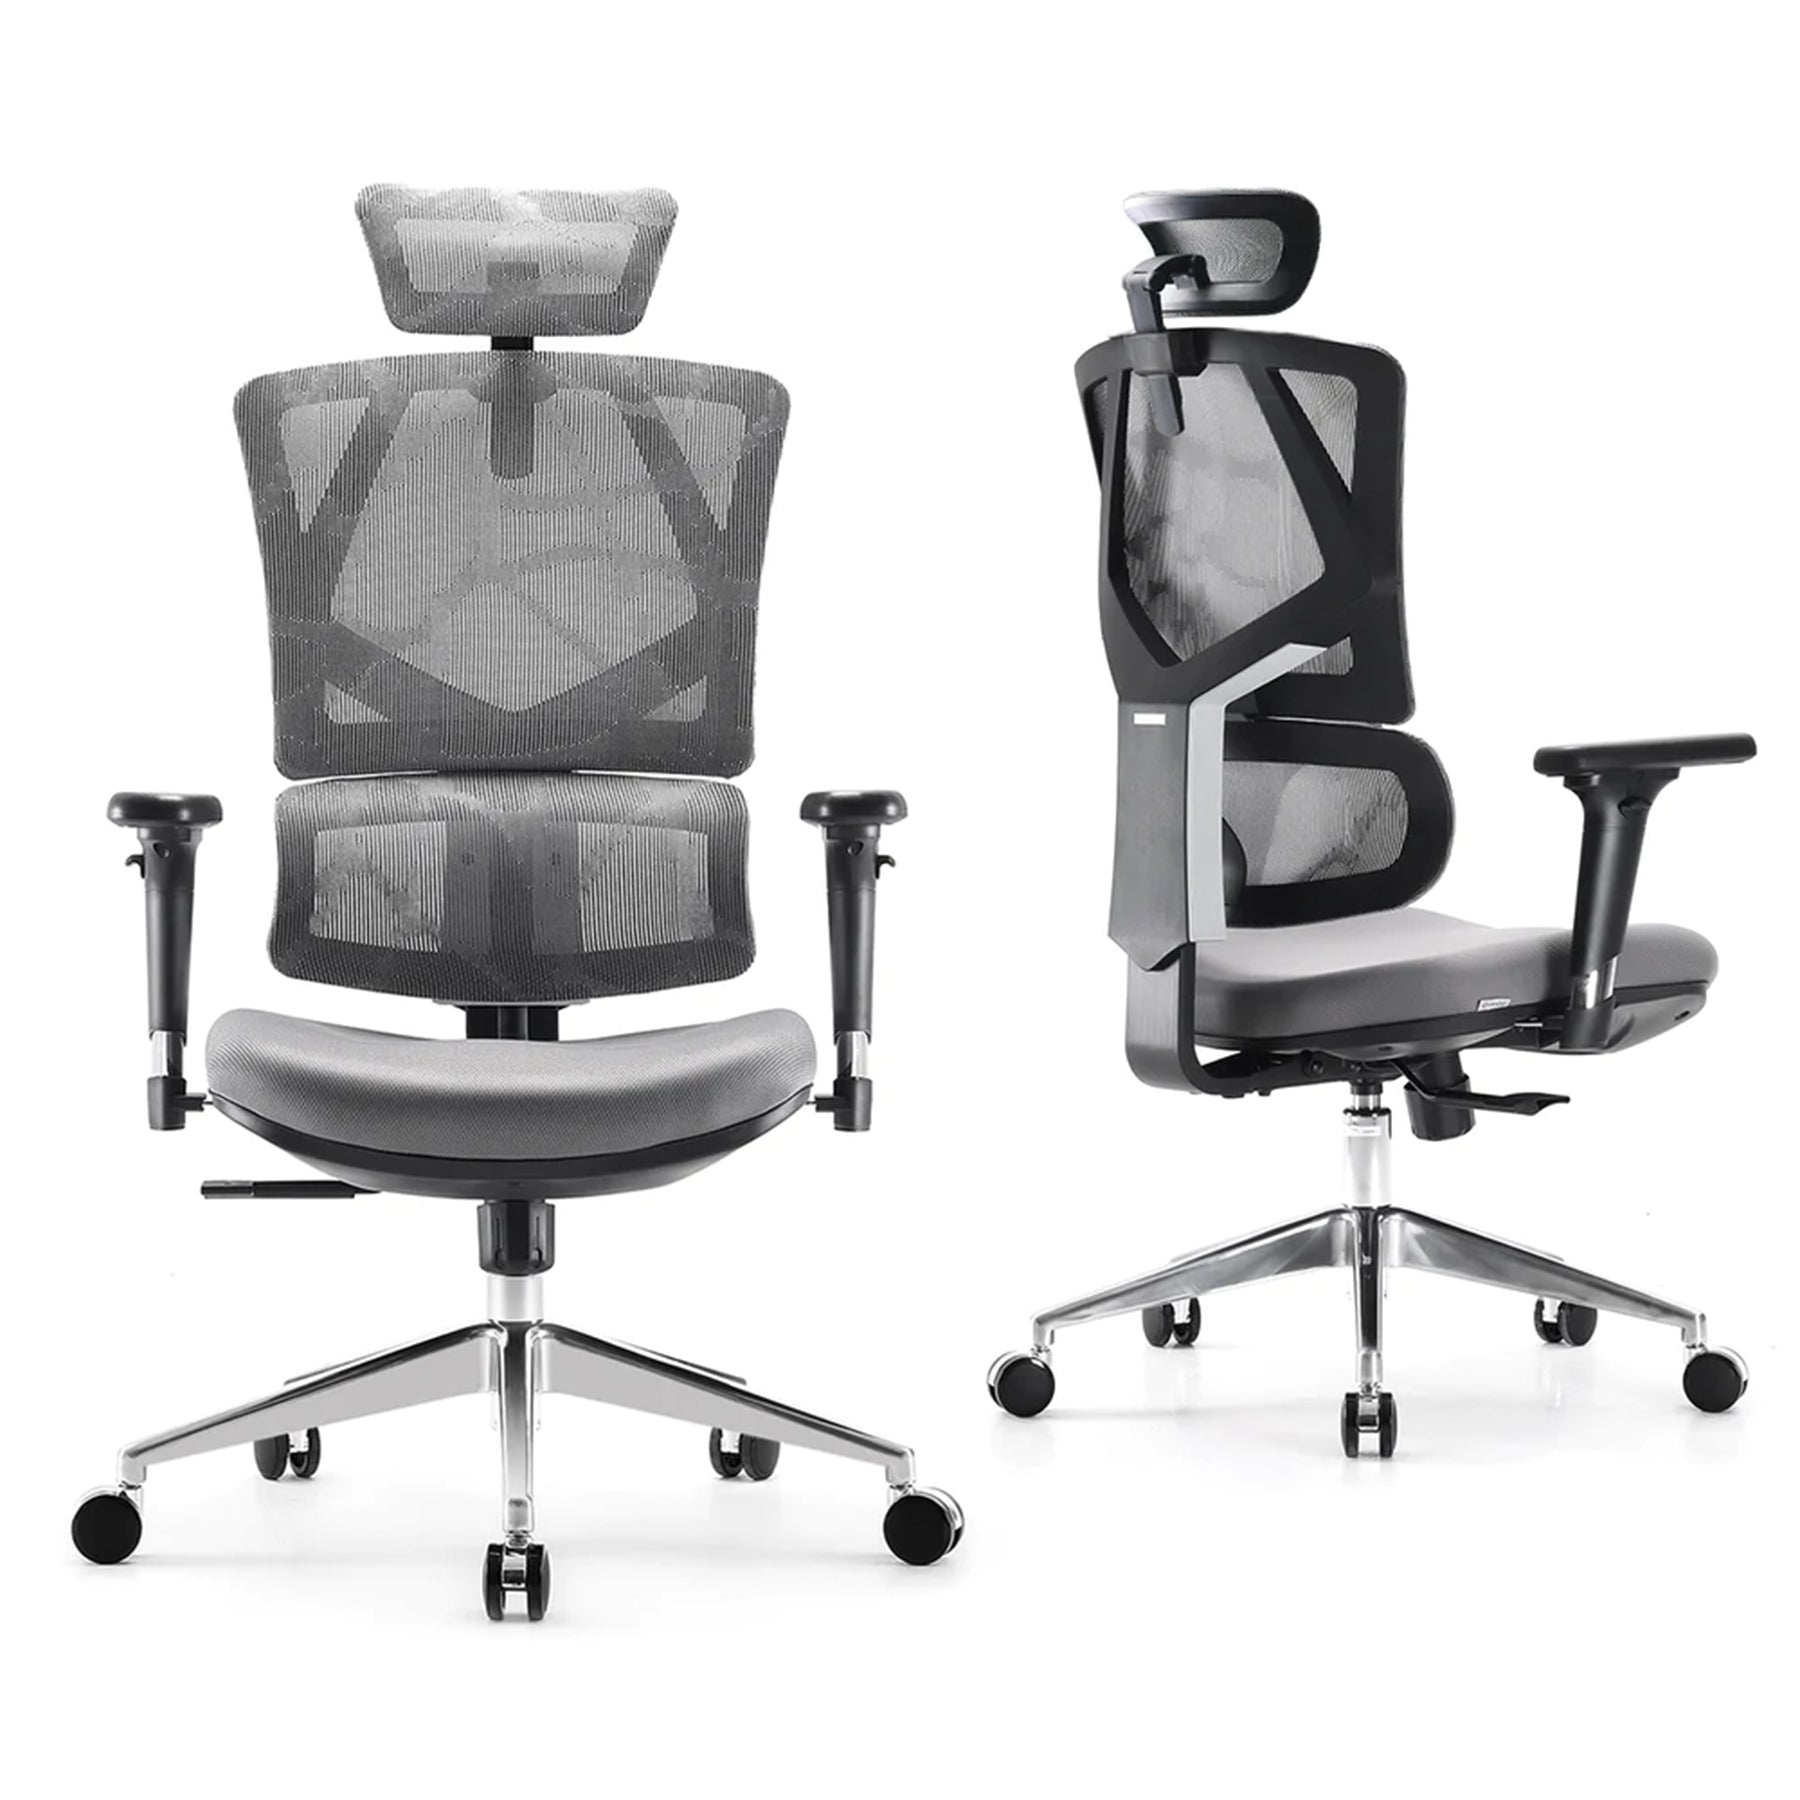 Sihoo M90D Ergnonomic Office Chair with Dynamic Lumbar Support